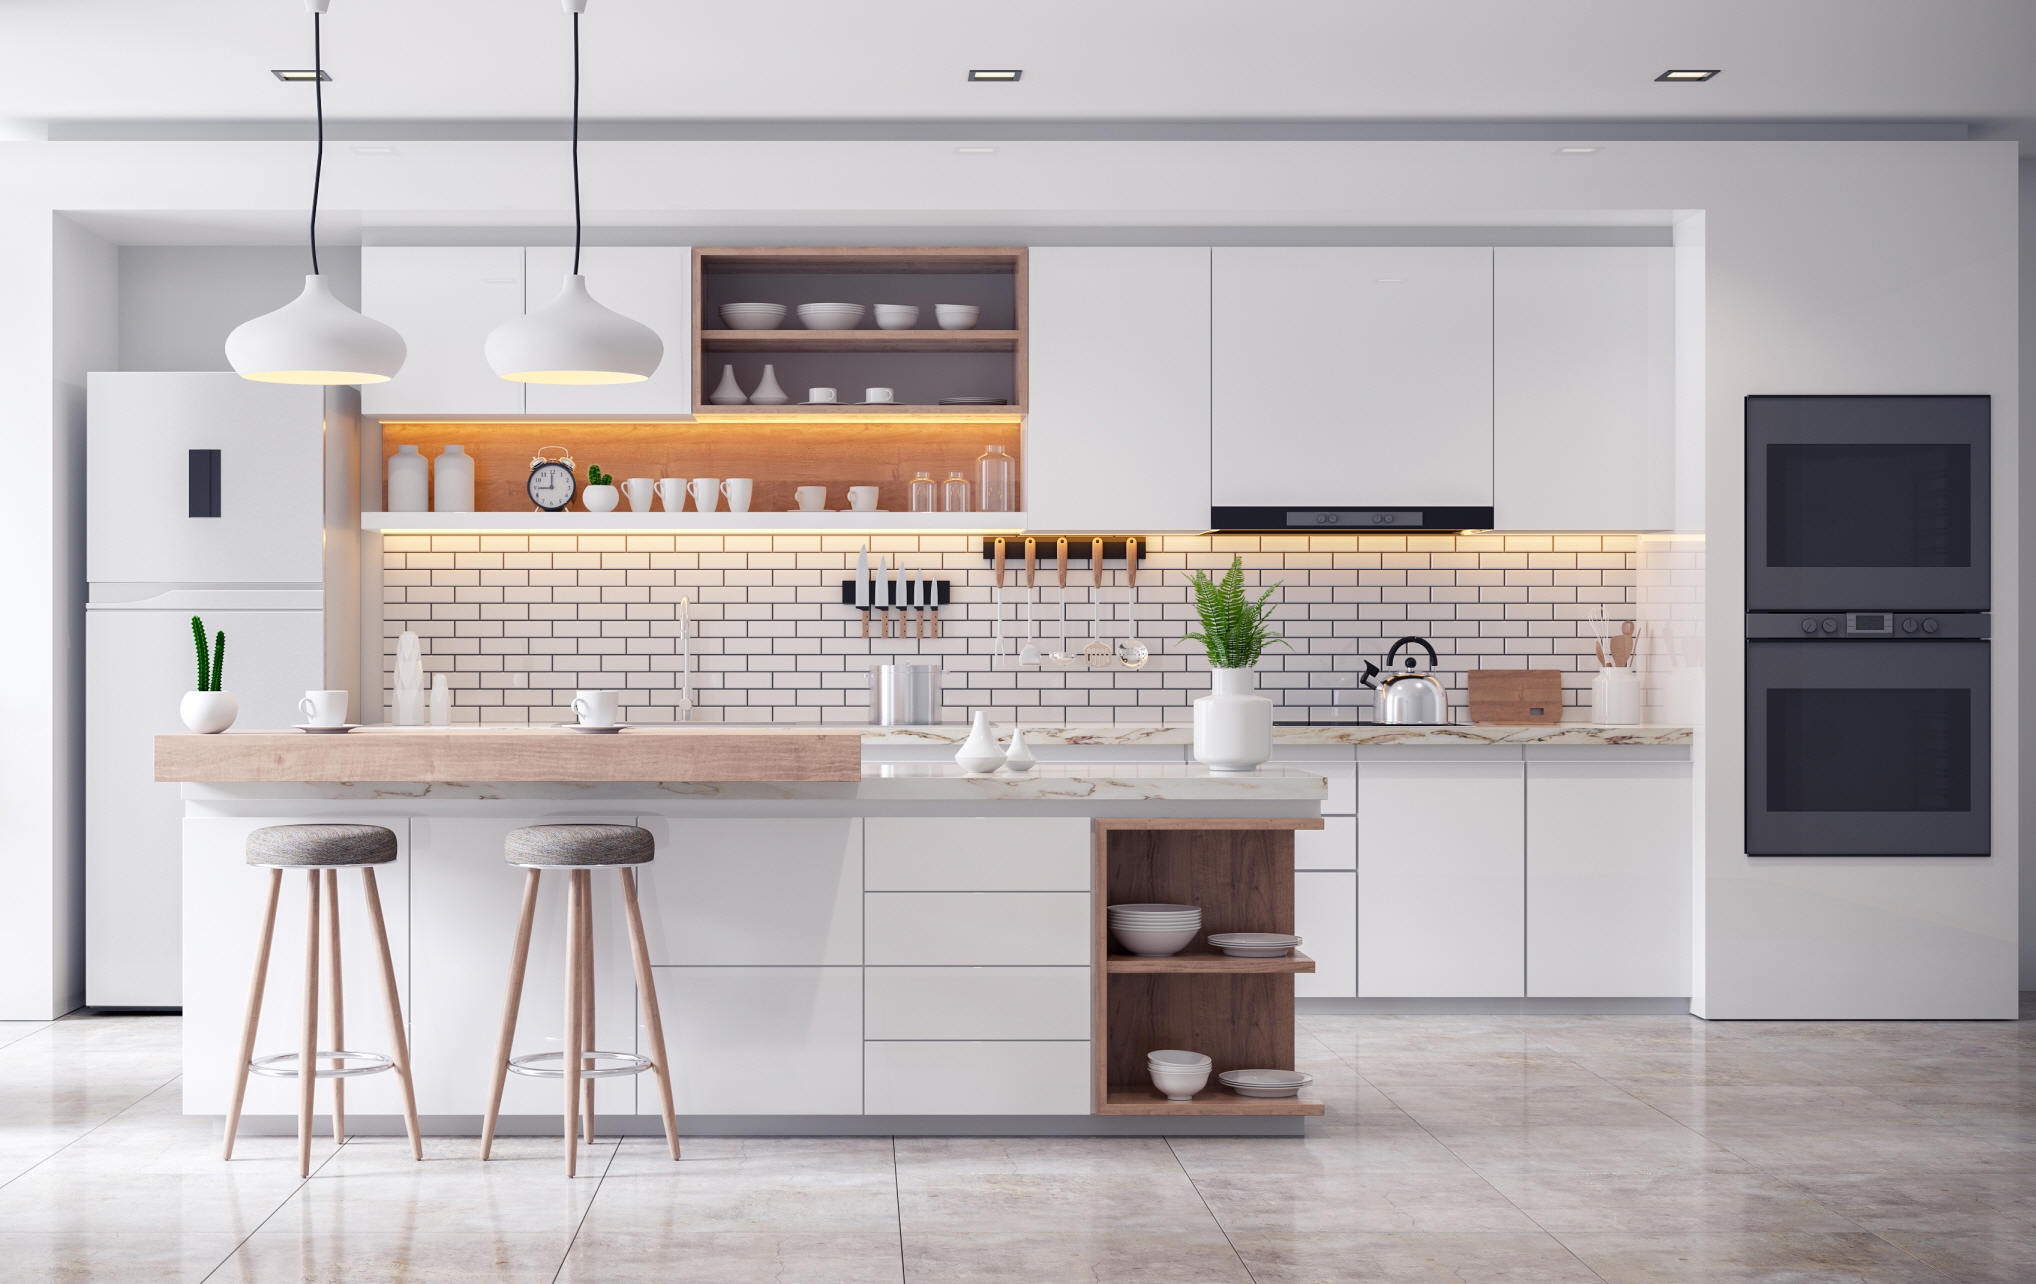 Revamp your kitchen affordably with an open layout. Remove barriers, add multi-functional zones, and maximize space for style and functionality.